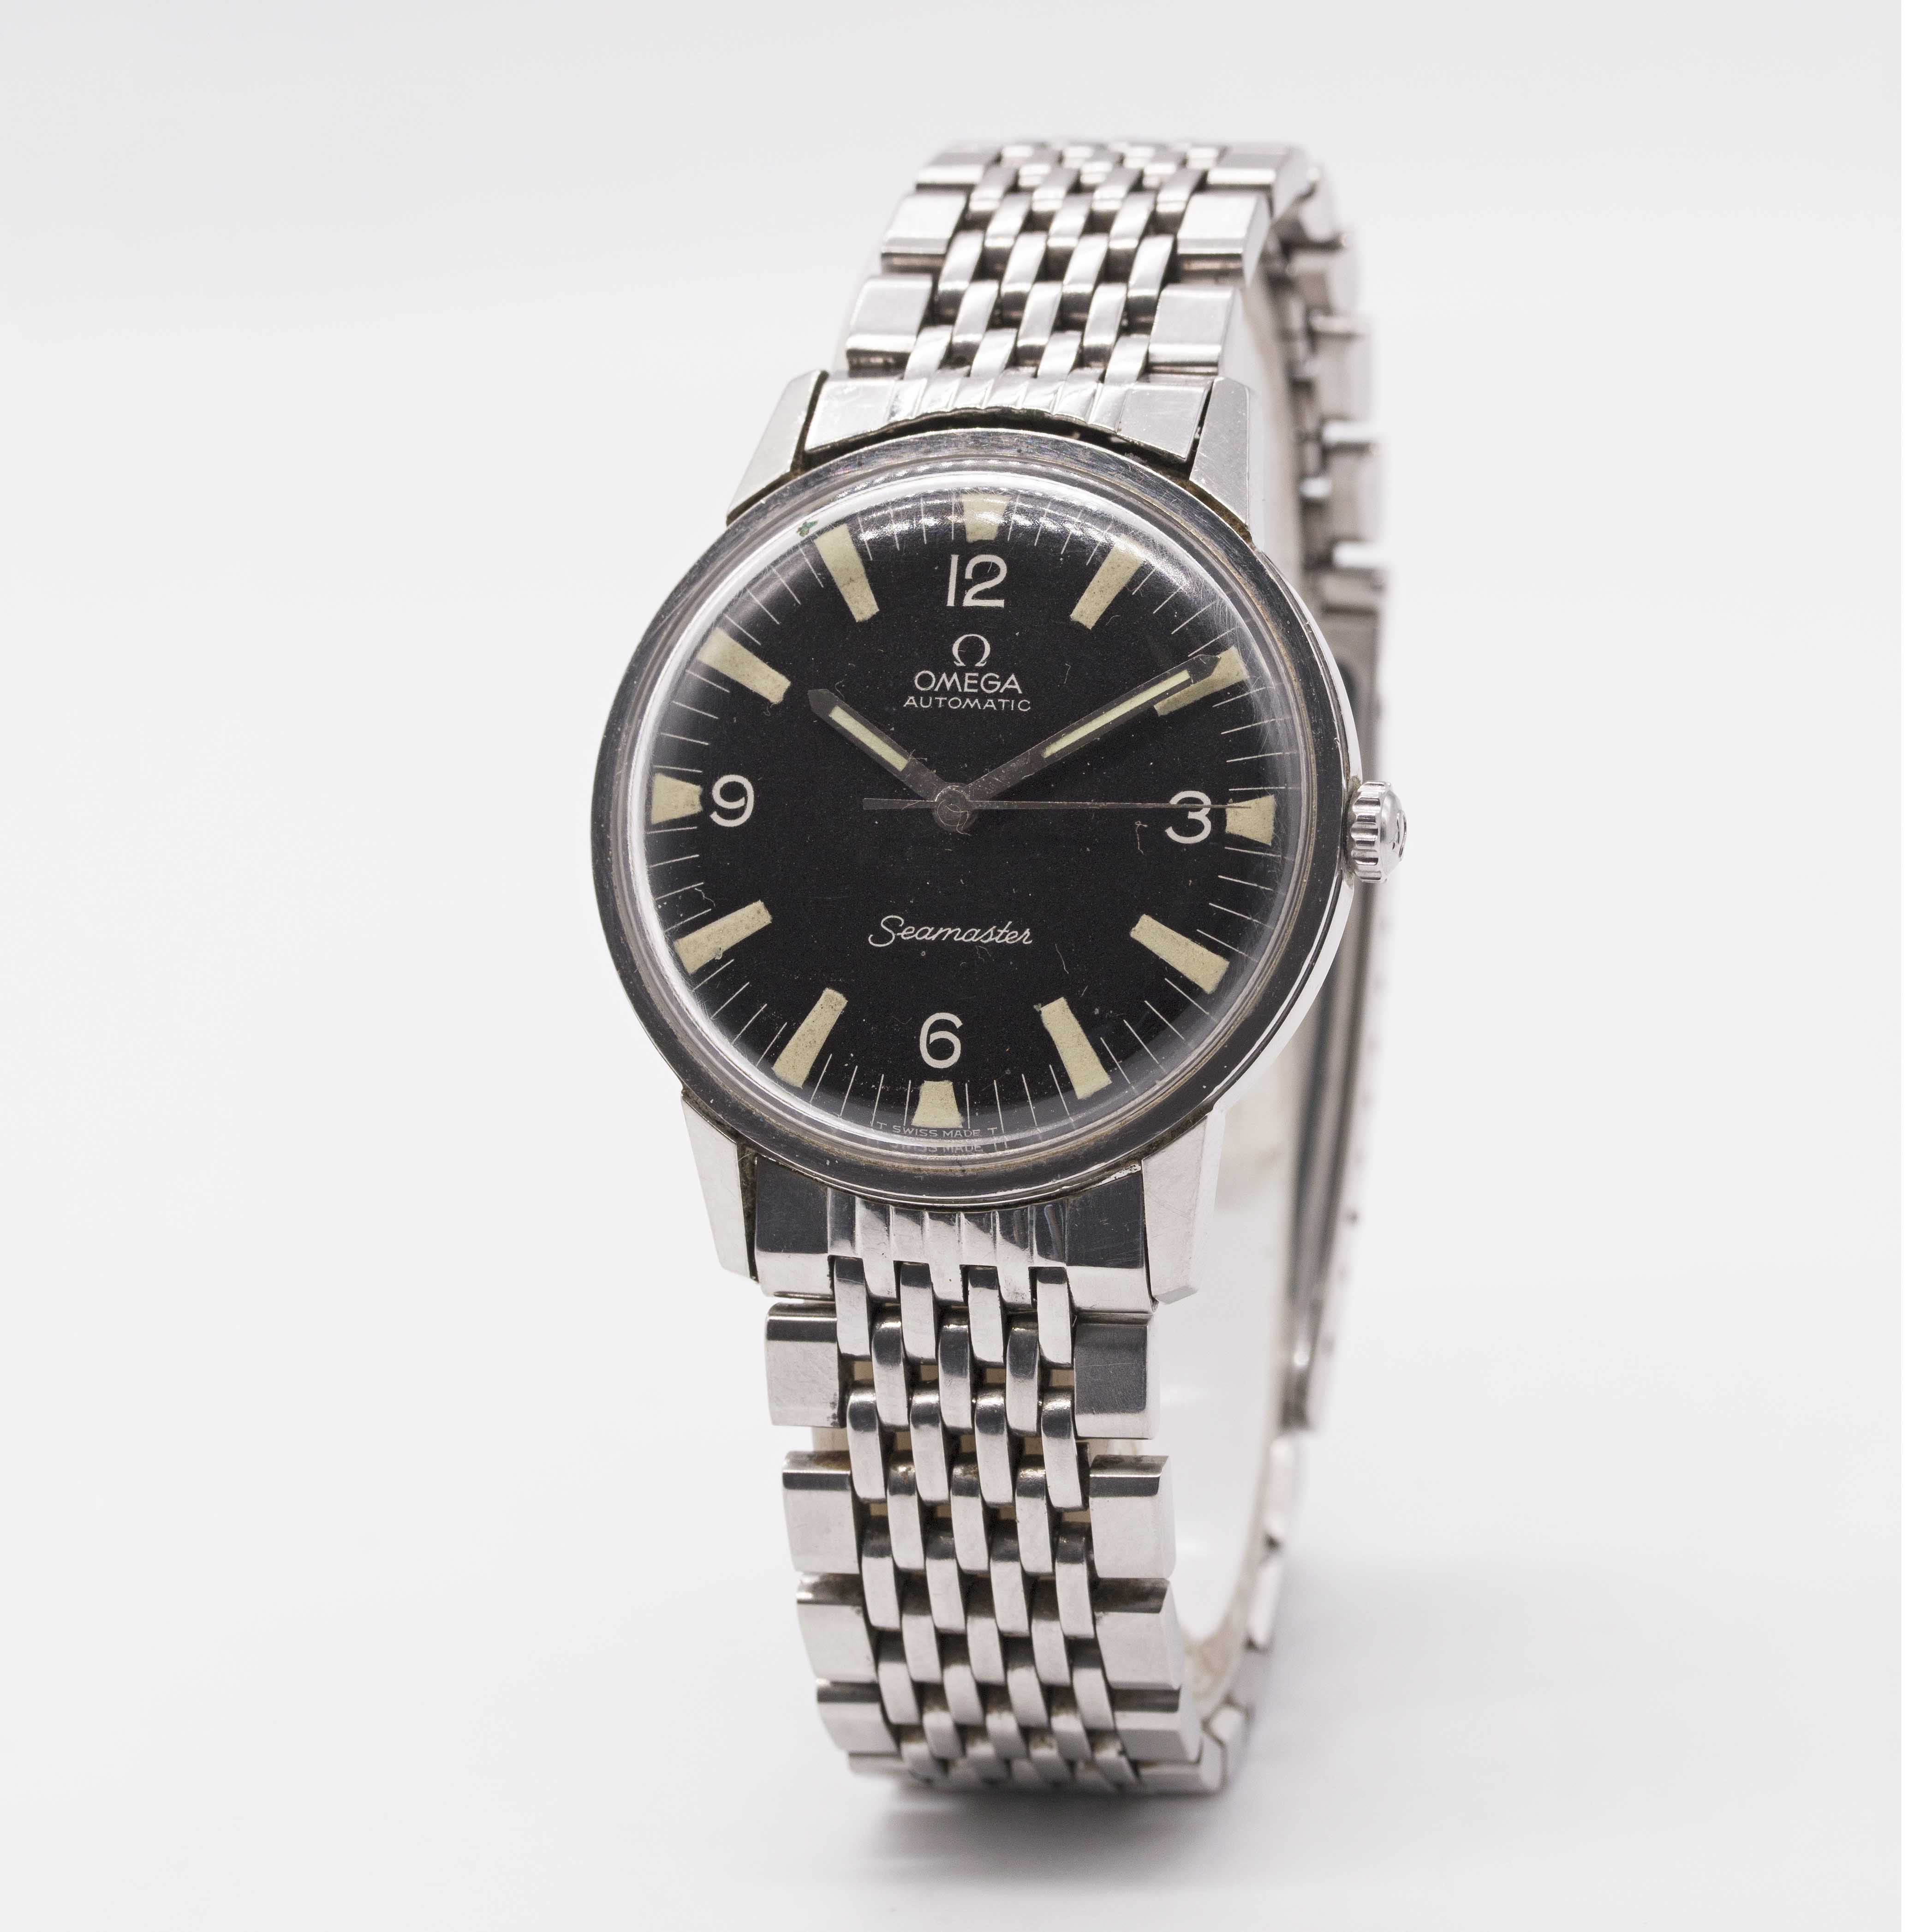 A GENTLEMAN'S STAINLESS STEEL OMEGA SEAMASTER AUTOMATIC BRACELET WATCH CIRCA 1967, REF. 165.002 WITH - Image 3 of 9